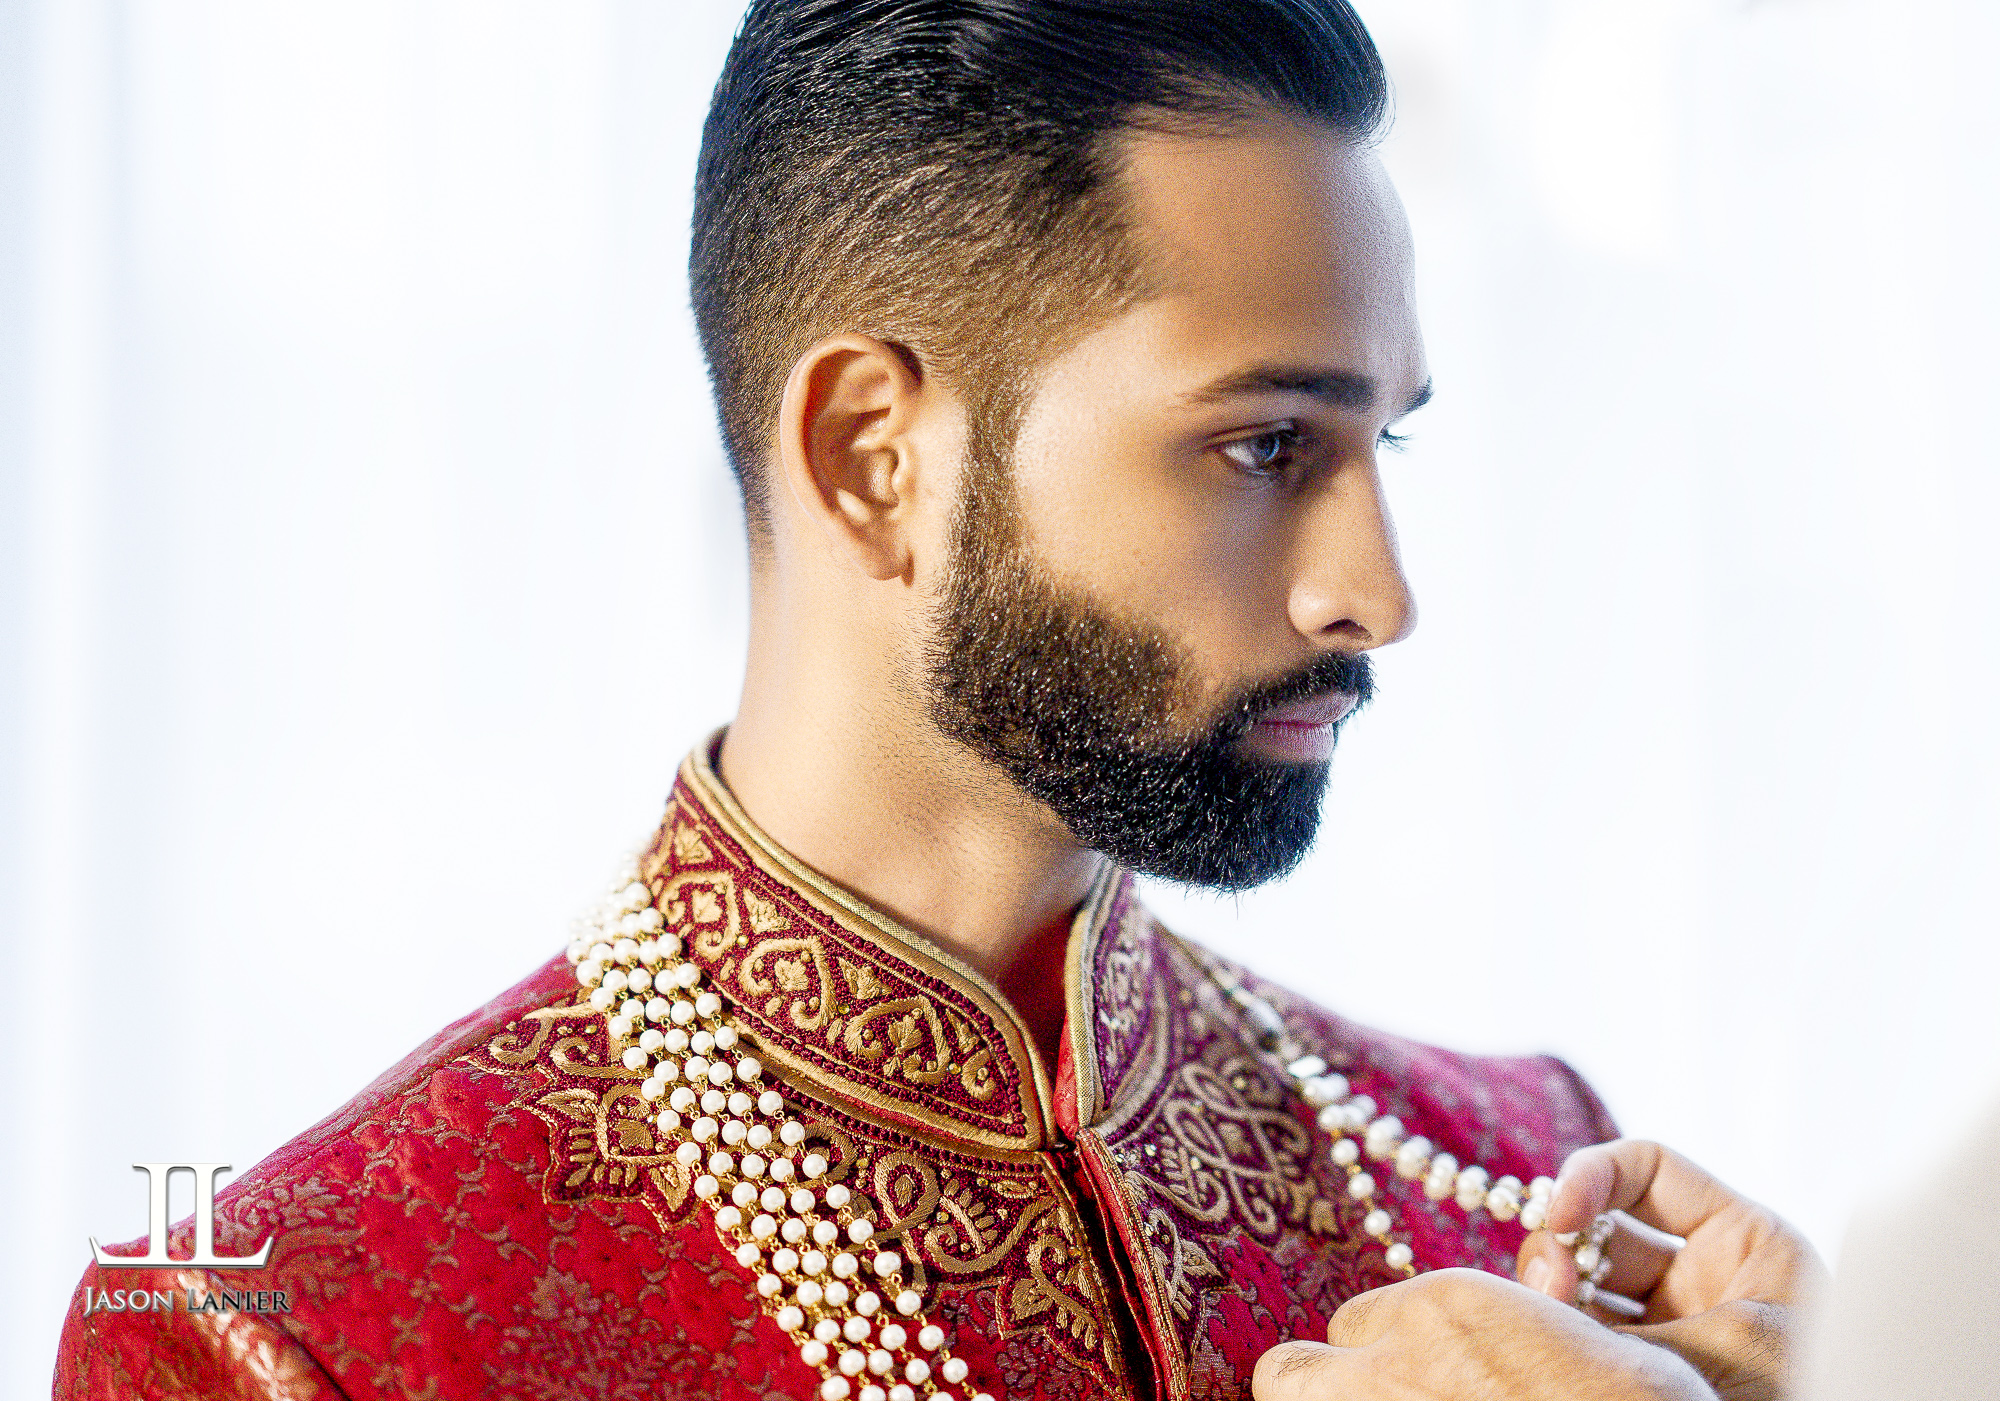 classic Indian haircut for wedding and Tuxedo suit | men's haircut 2020 -  YouTube